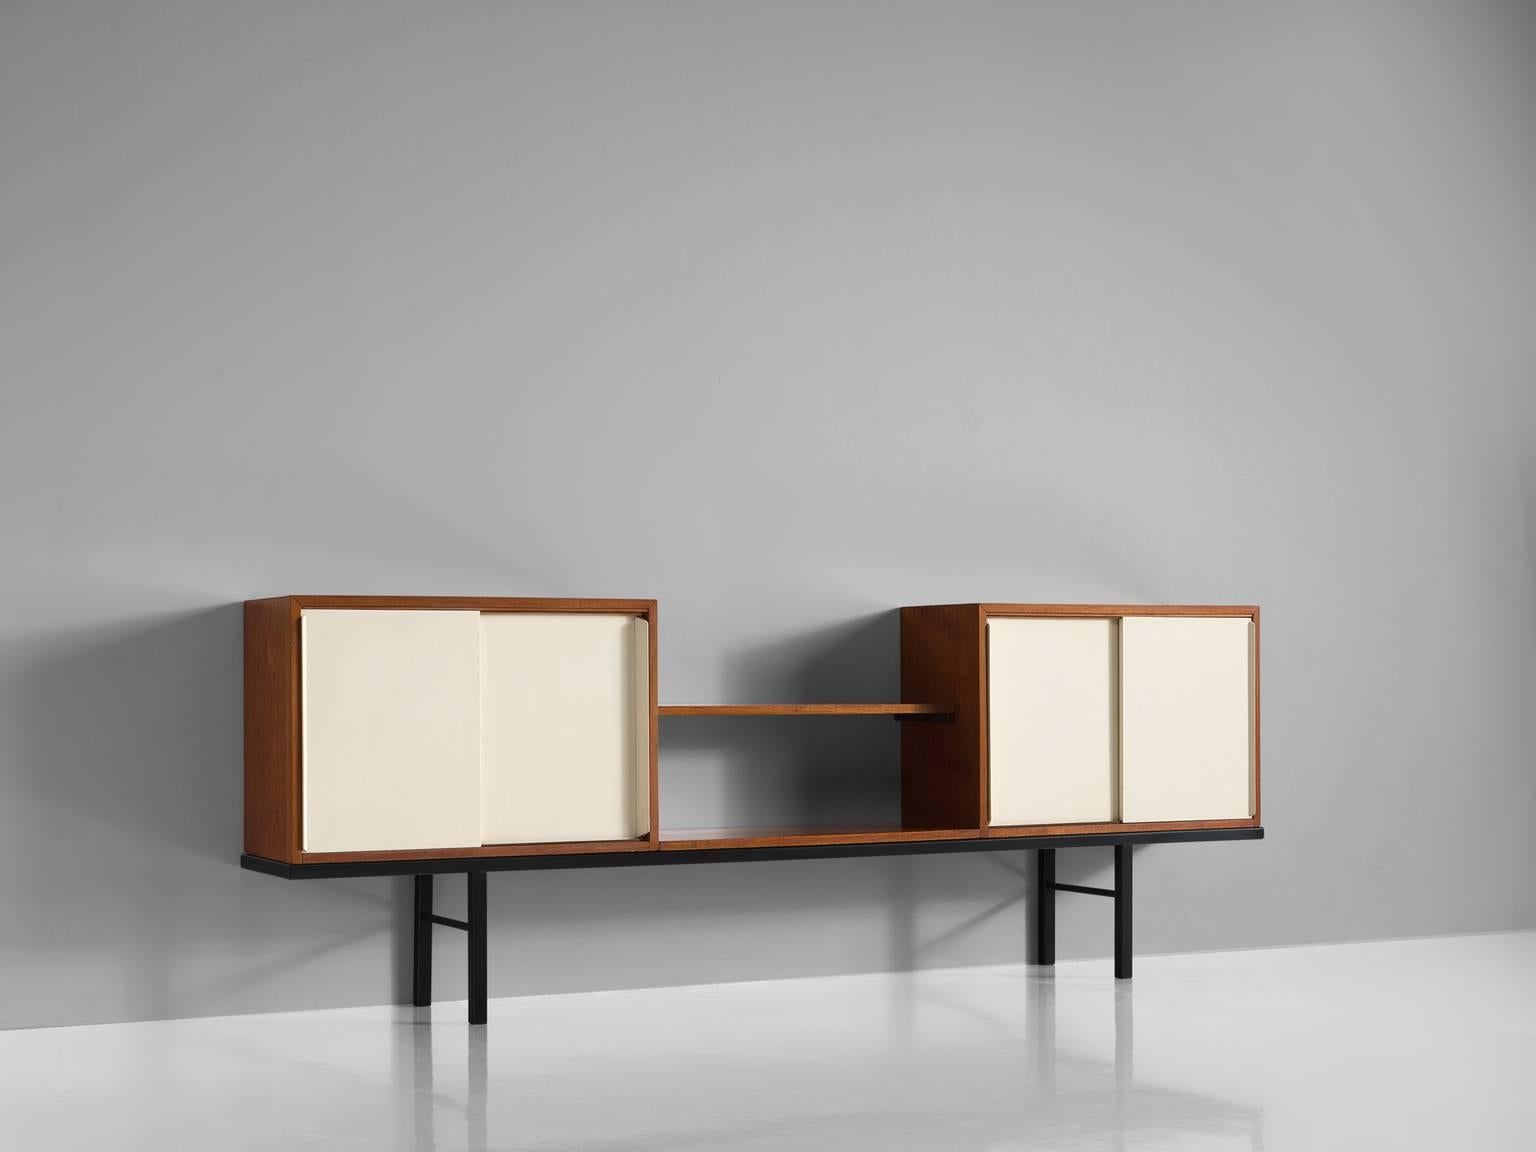 Martin Visser for 't Spectrum, Bornholm Collection KW63, wood, metal, glass, The Netherlands, 1956-1959

This rare sideboard is executed in mixed materials. The credenza features a Minimalist black metal base and two cabinets with sliding doors.